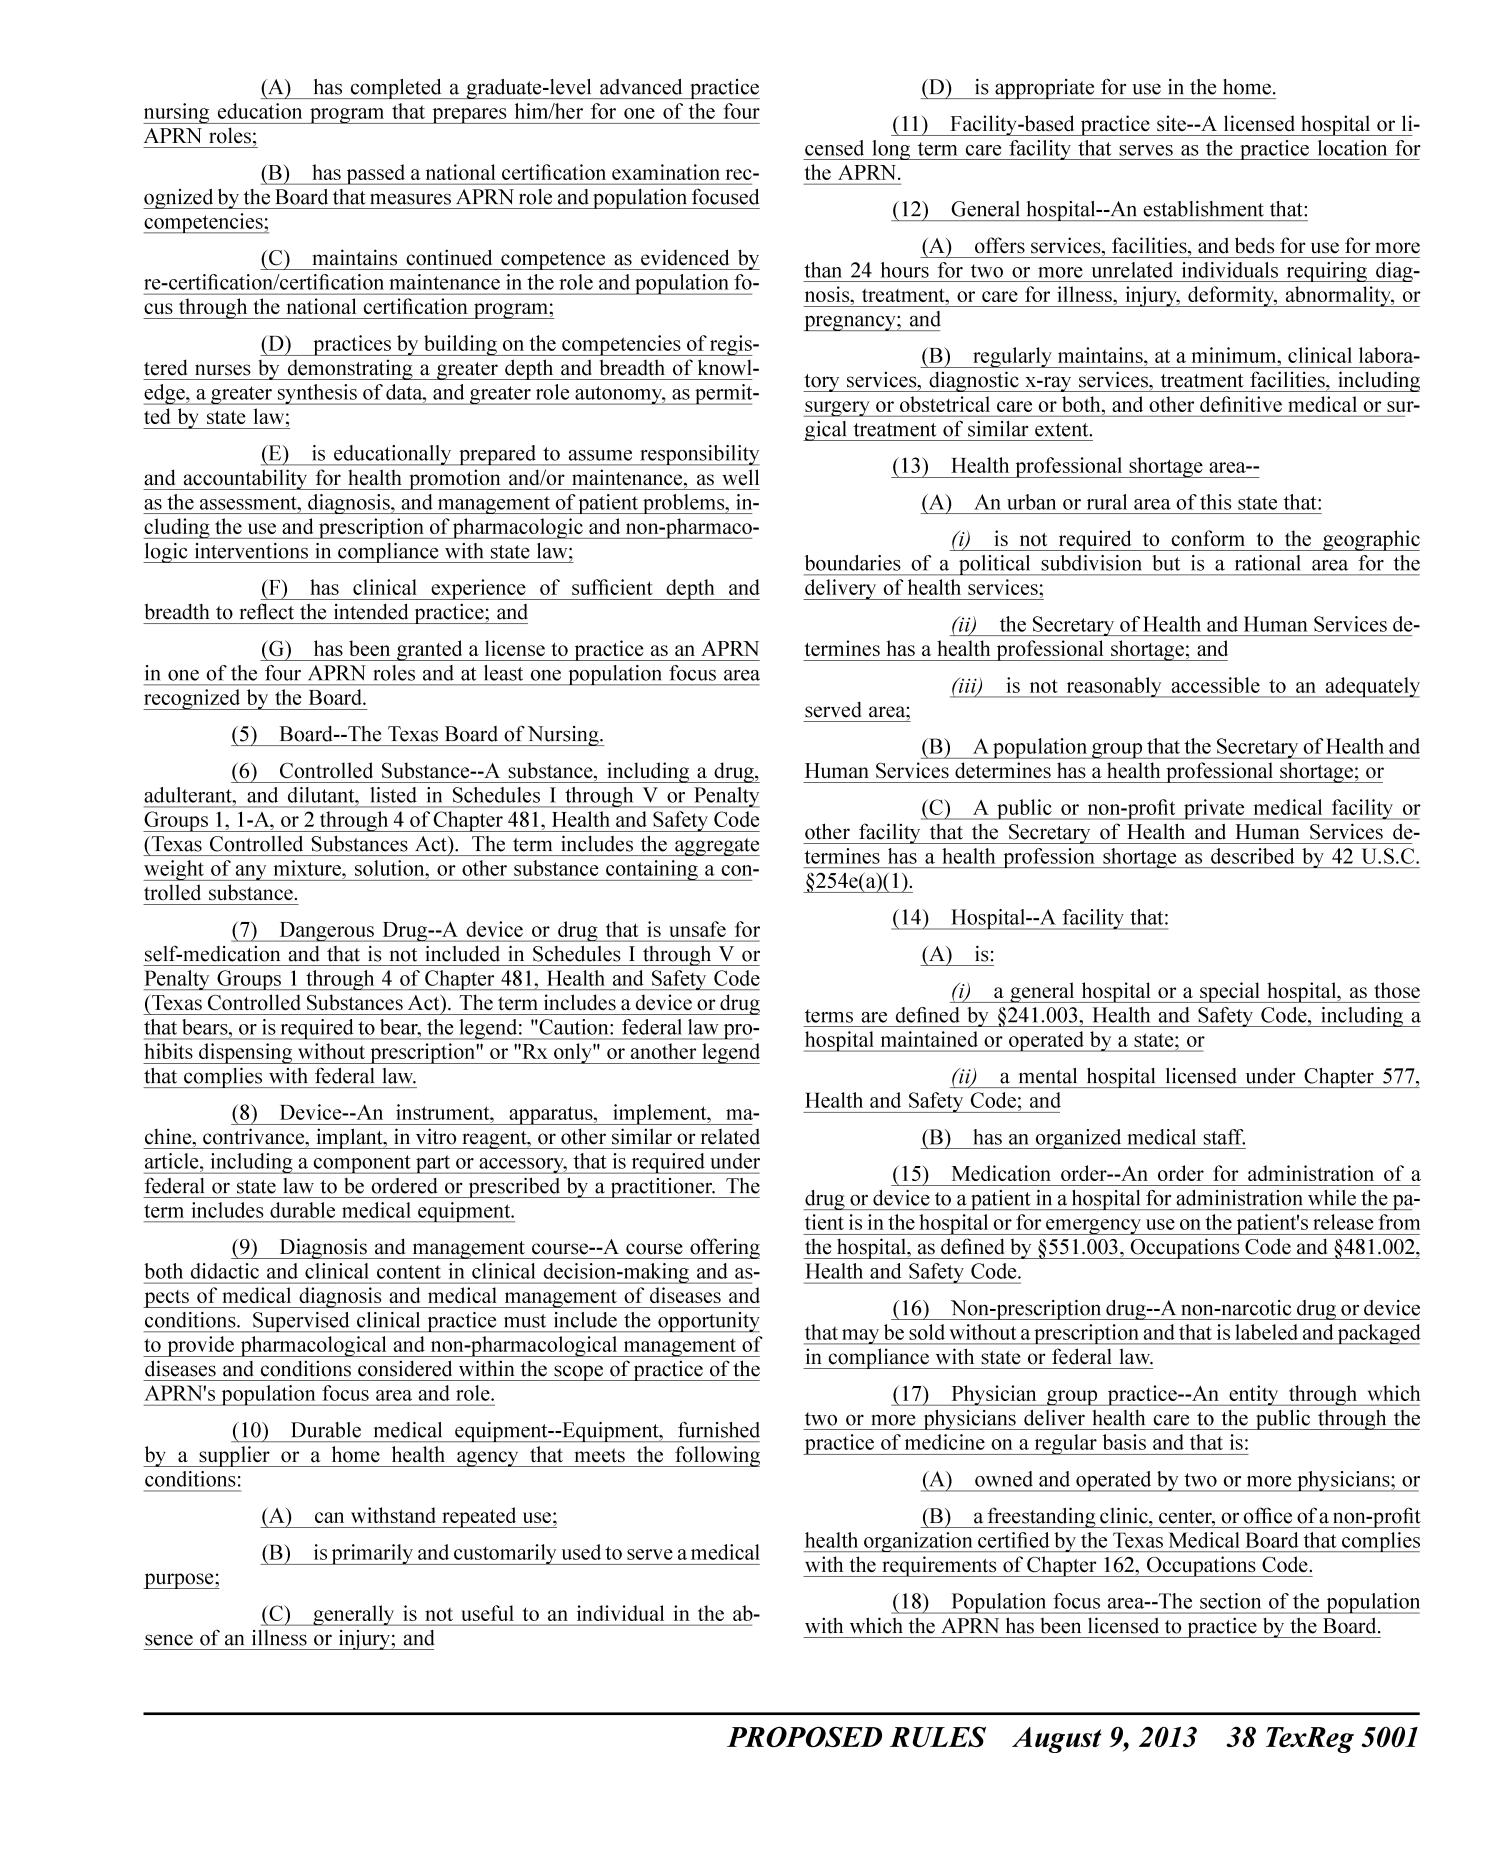 Texas Register, Volume 38, Number 32, Pages 4957-5134, August 9, 2013
                                                
                                                    5001
                                                